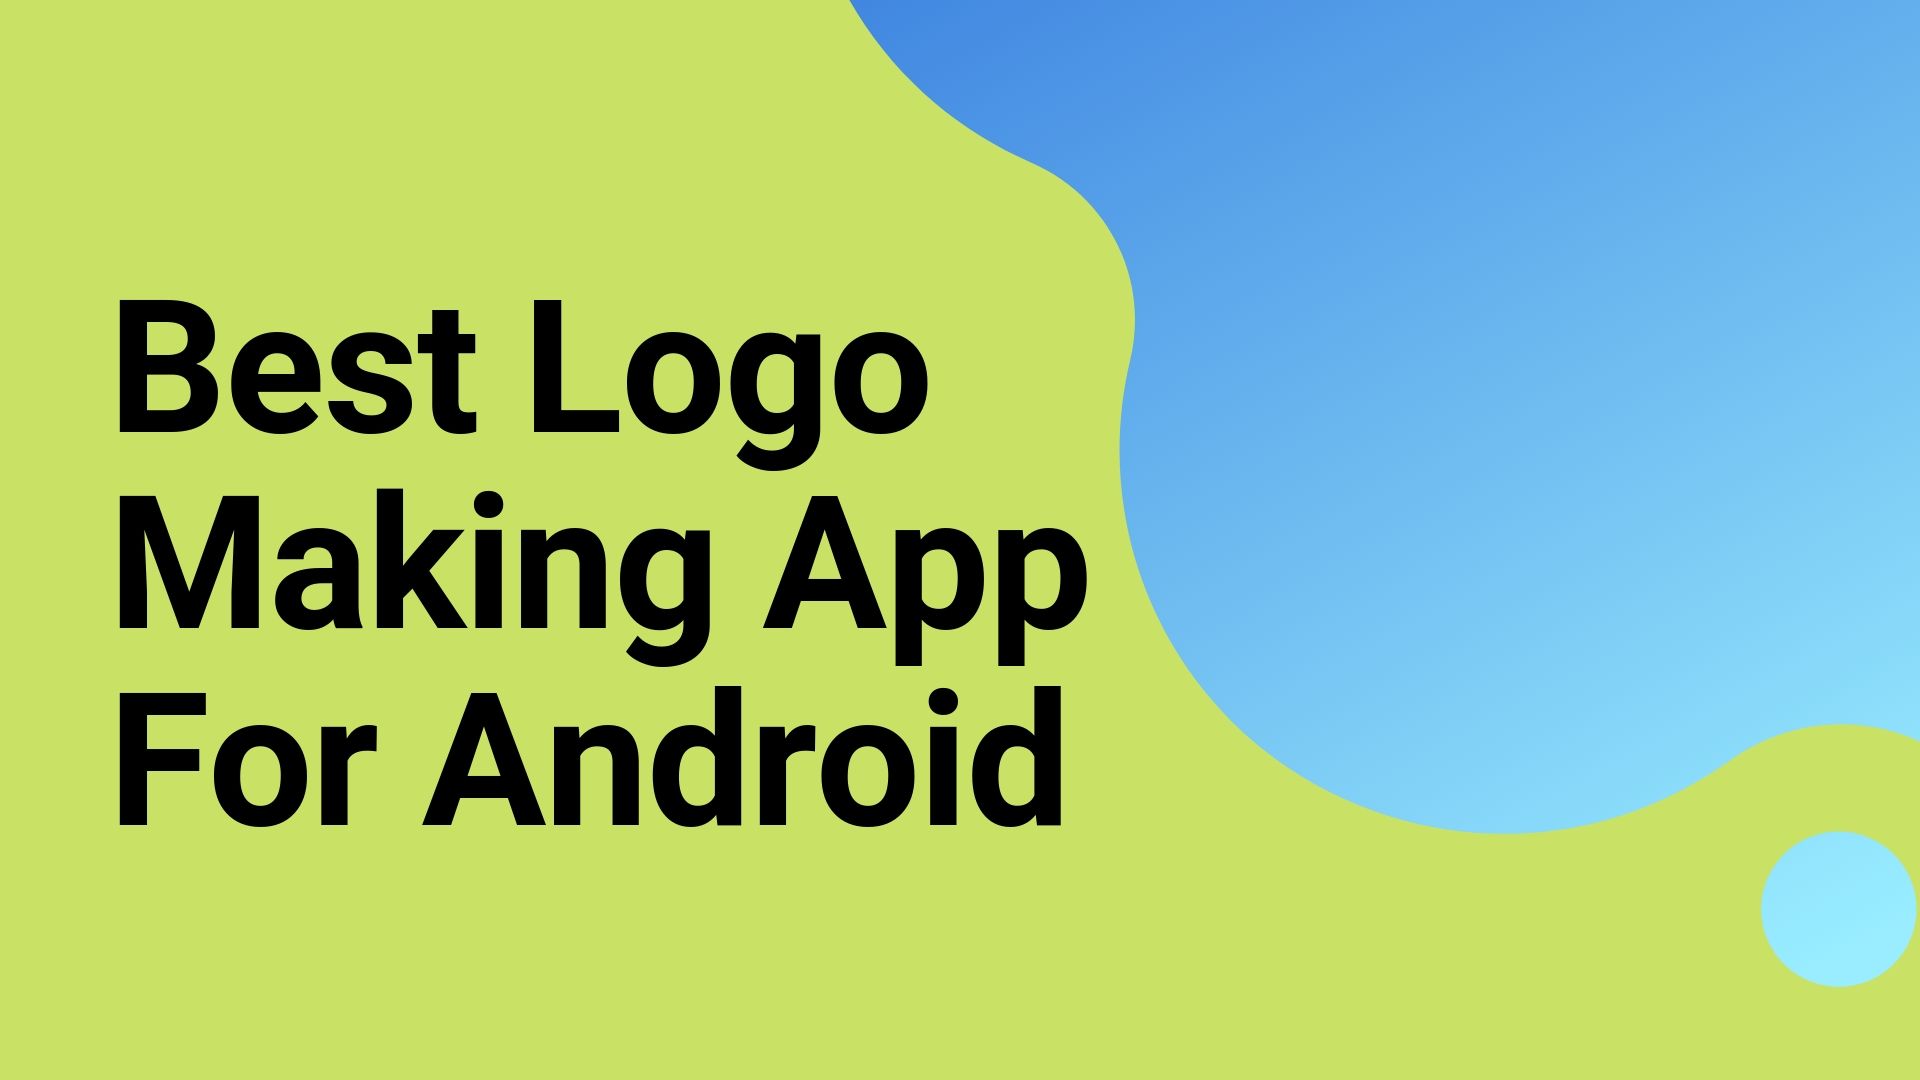 Best Logo Making App For Android